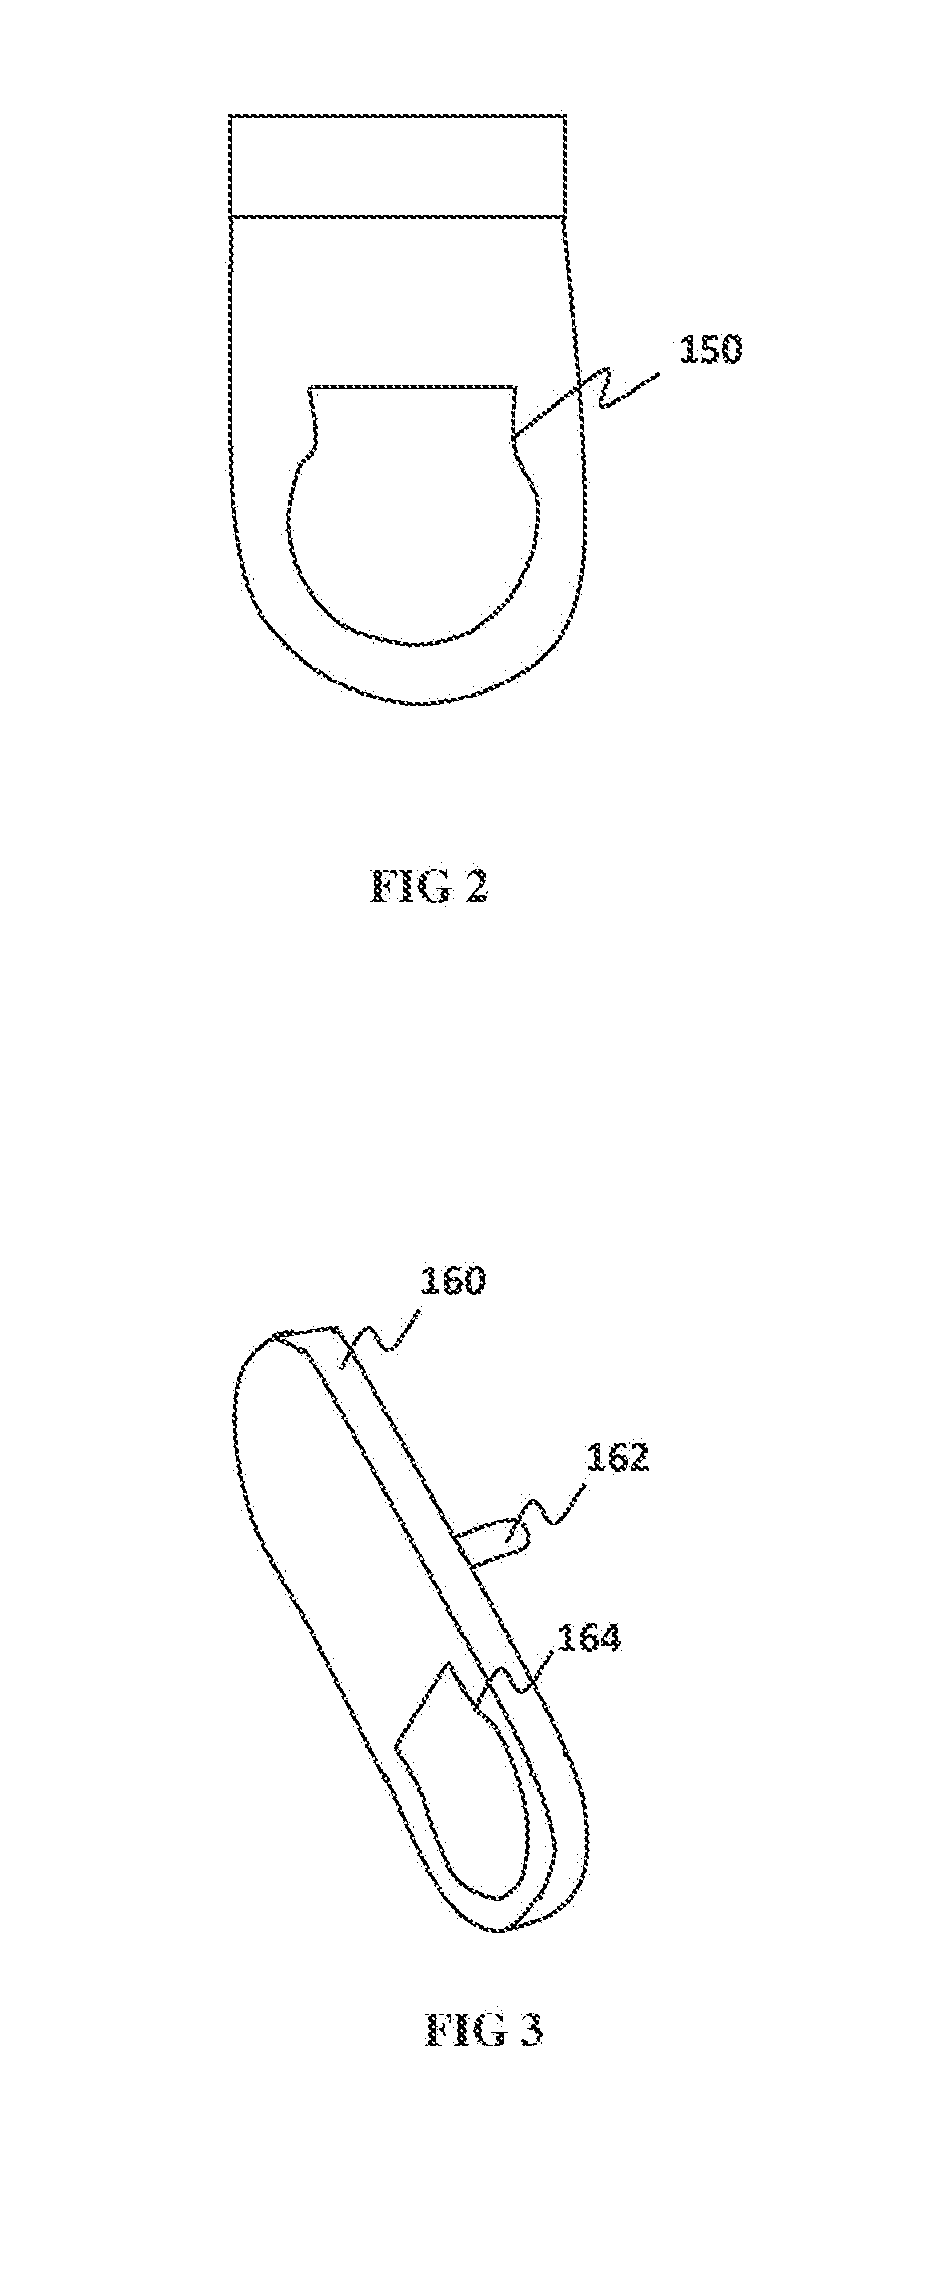 Object authentication device and method